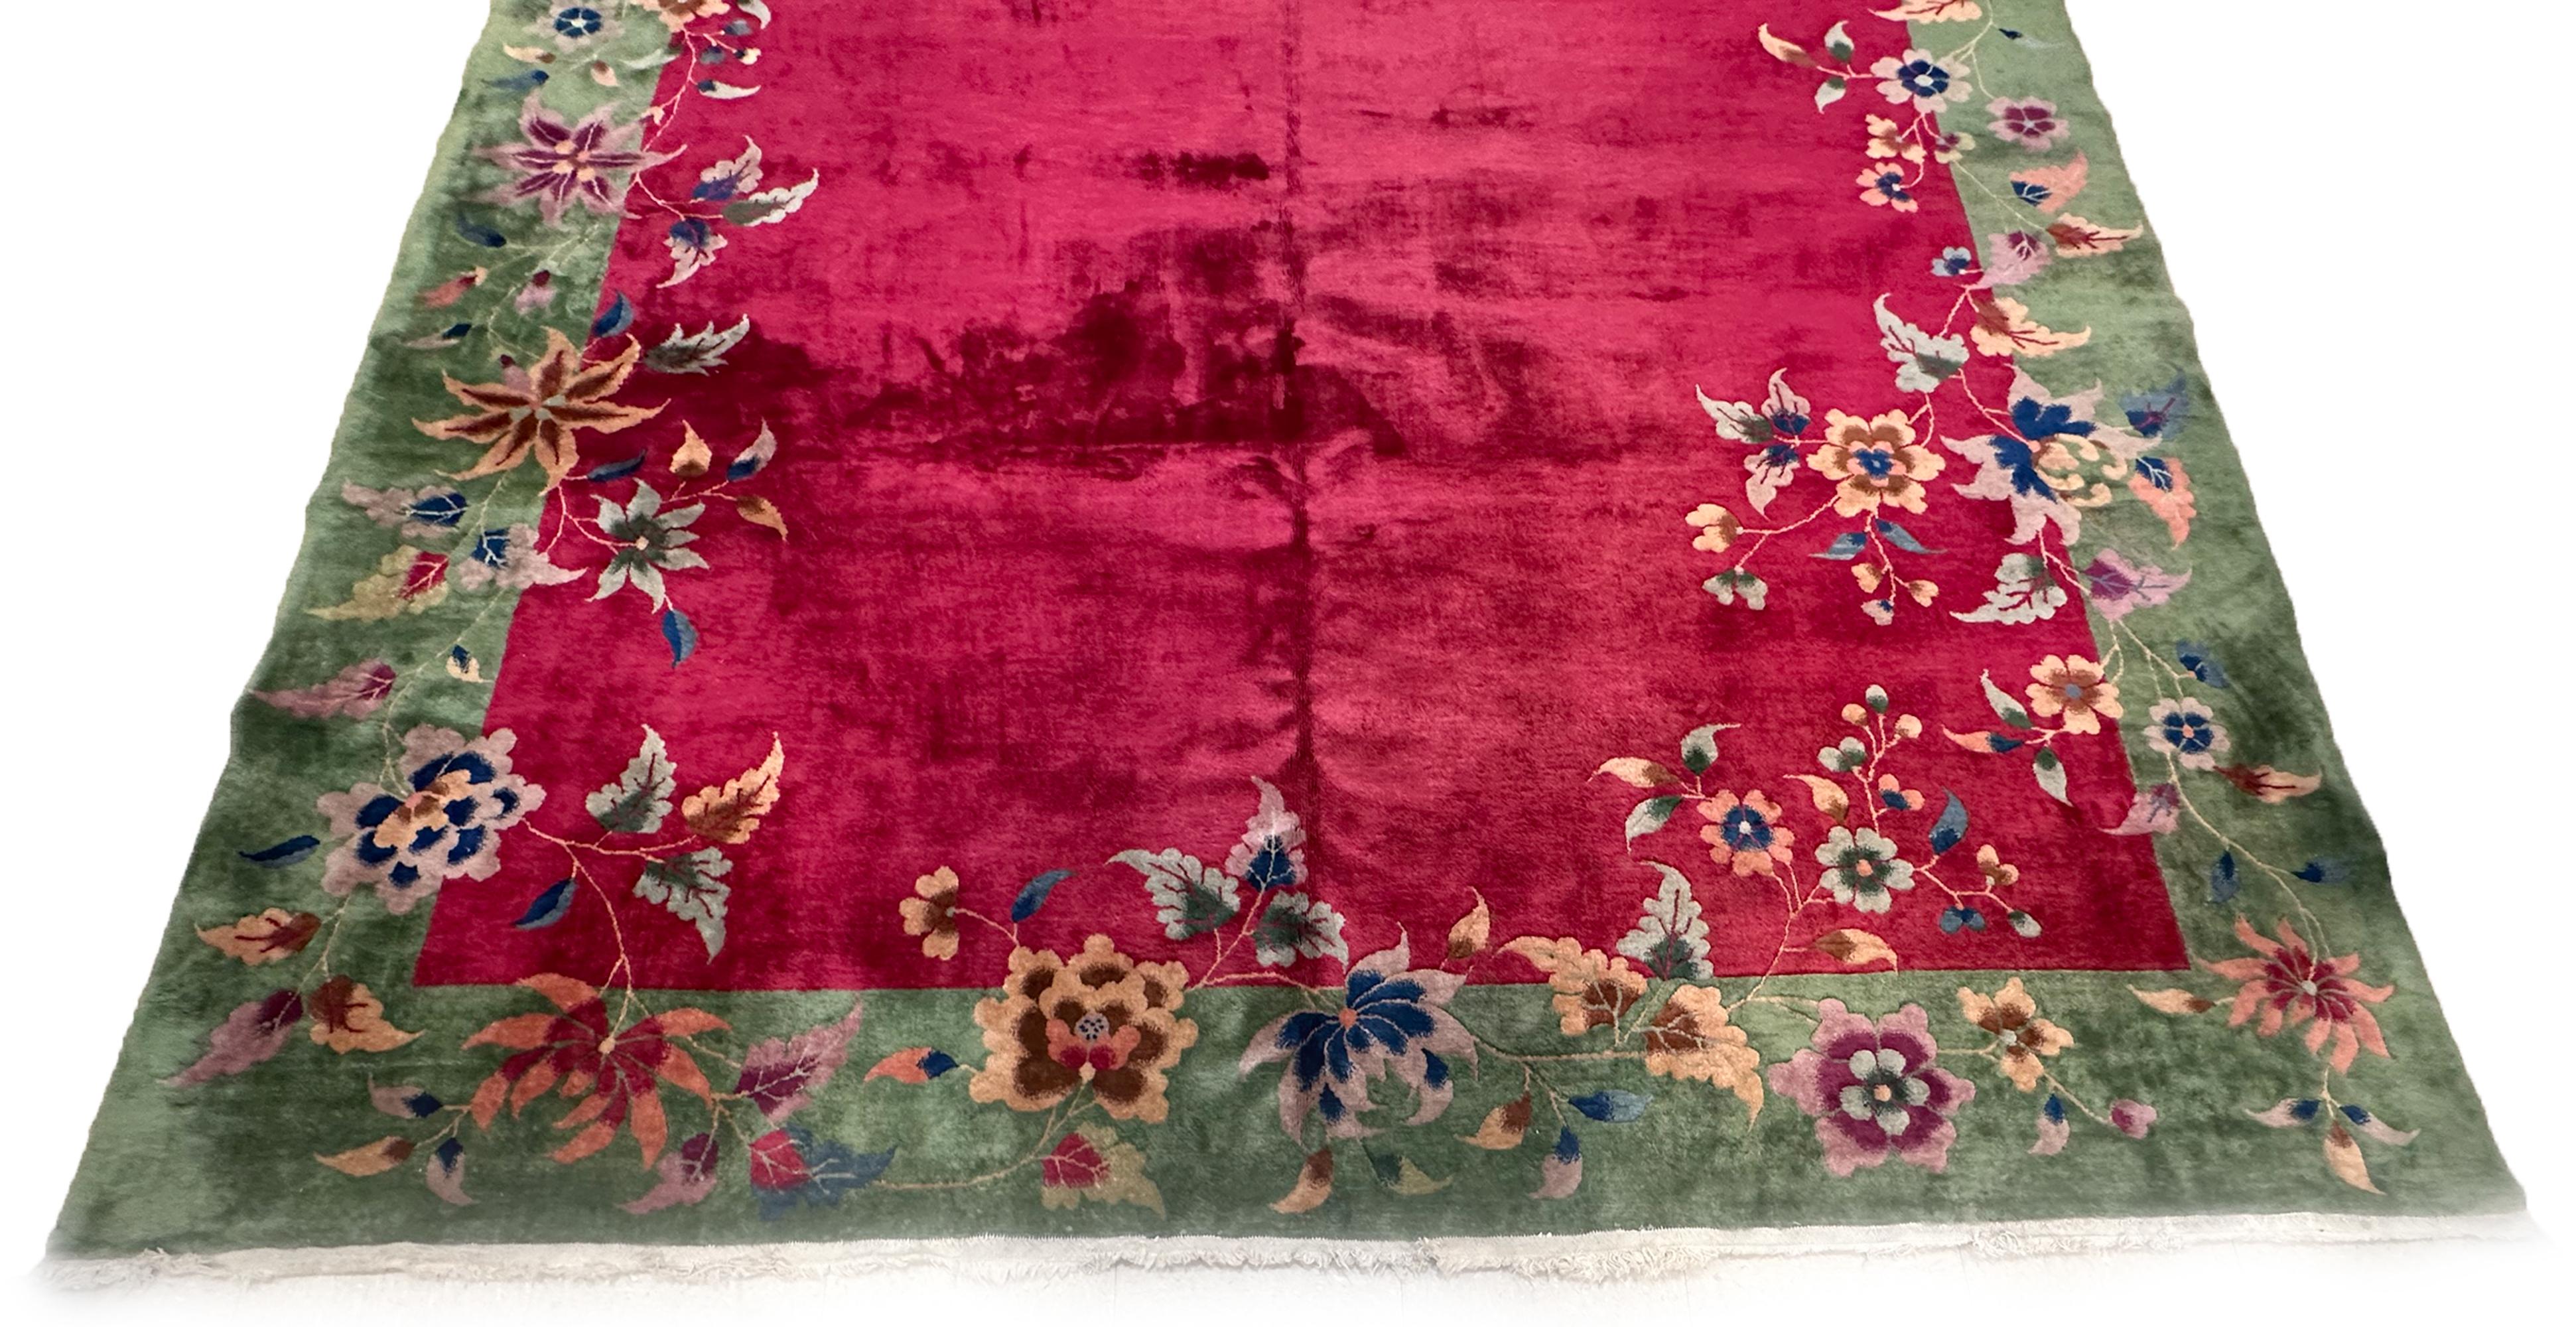 Rare Antique Art Deco Rug Walter Nichols Purple Chinese Rug 9x12 275cm x 351cm In Good Condition For Sale In New York, NY